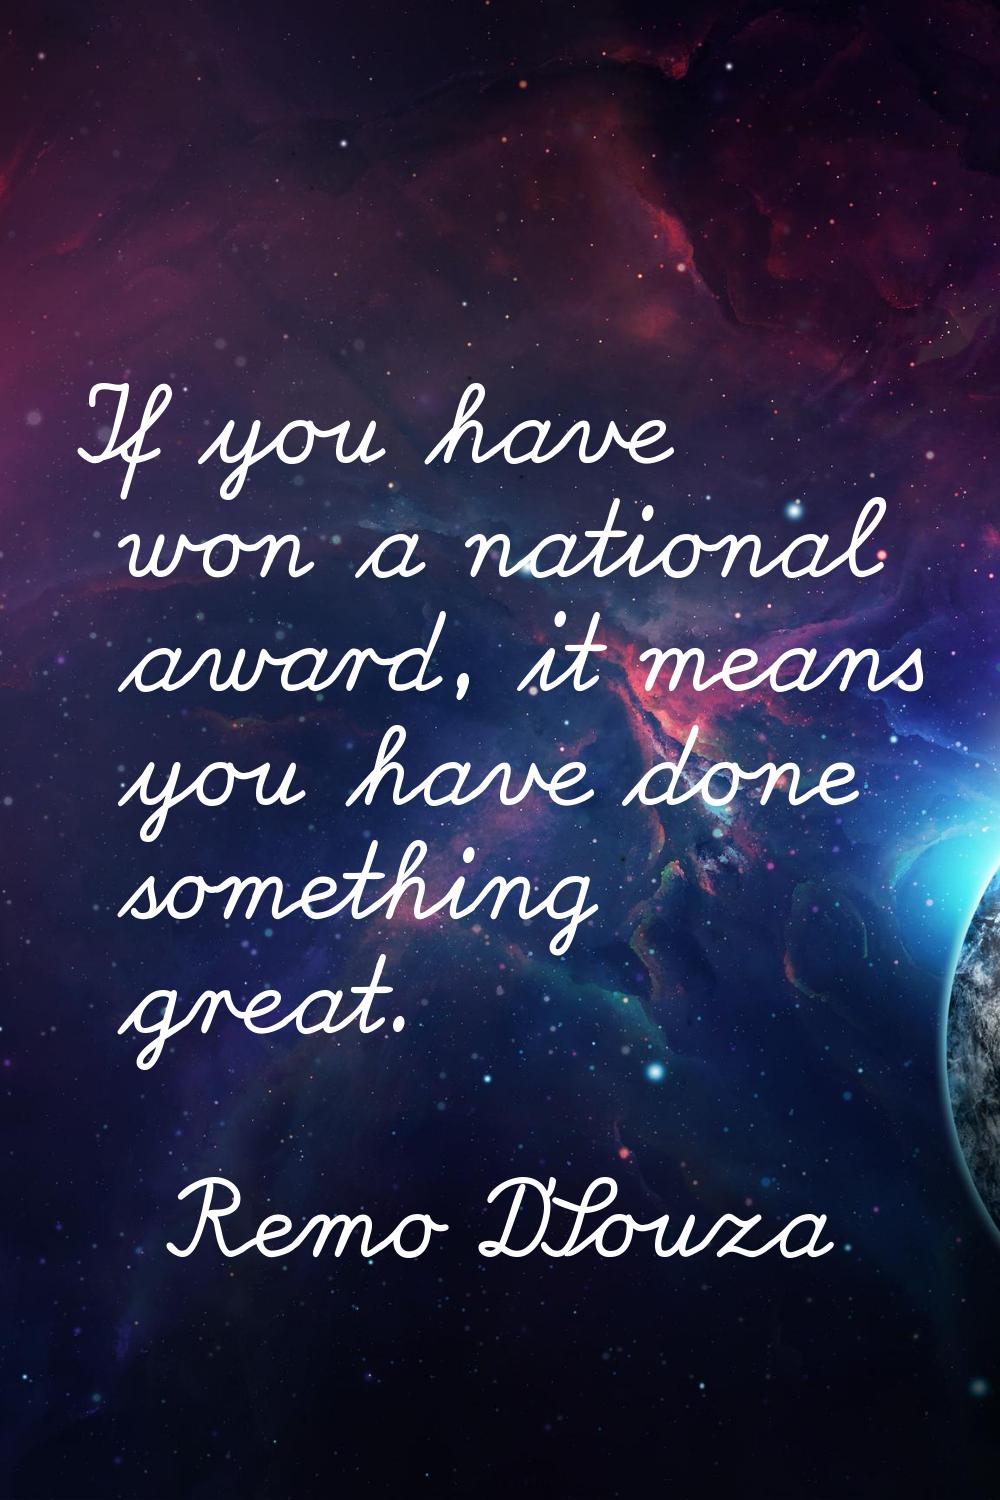 If you have won a national award, it means you have done something great.